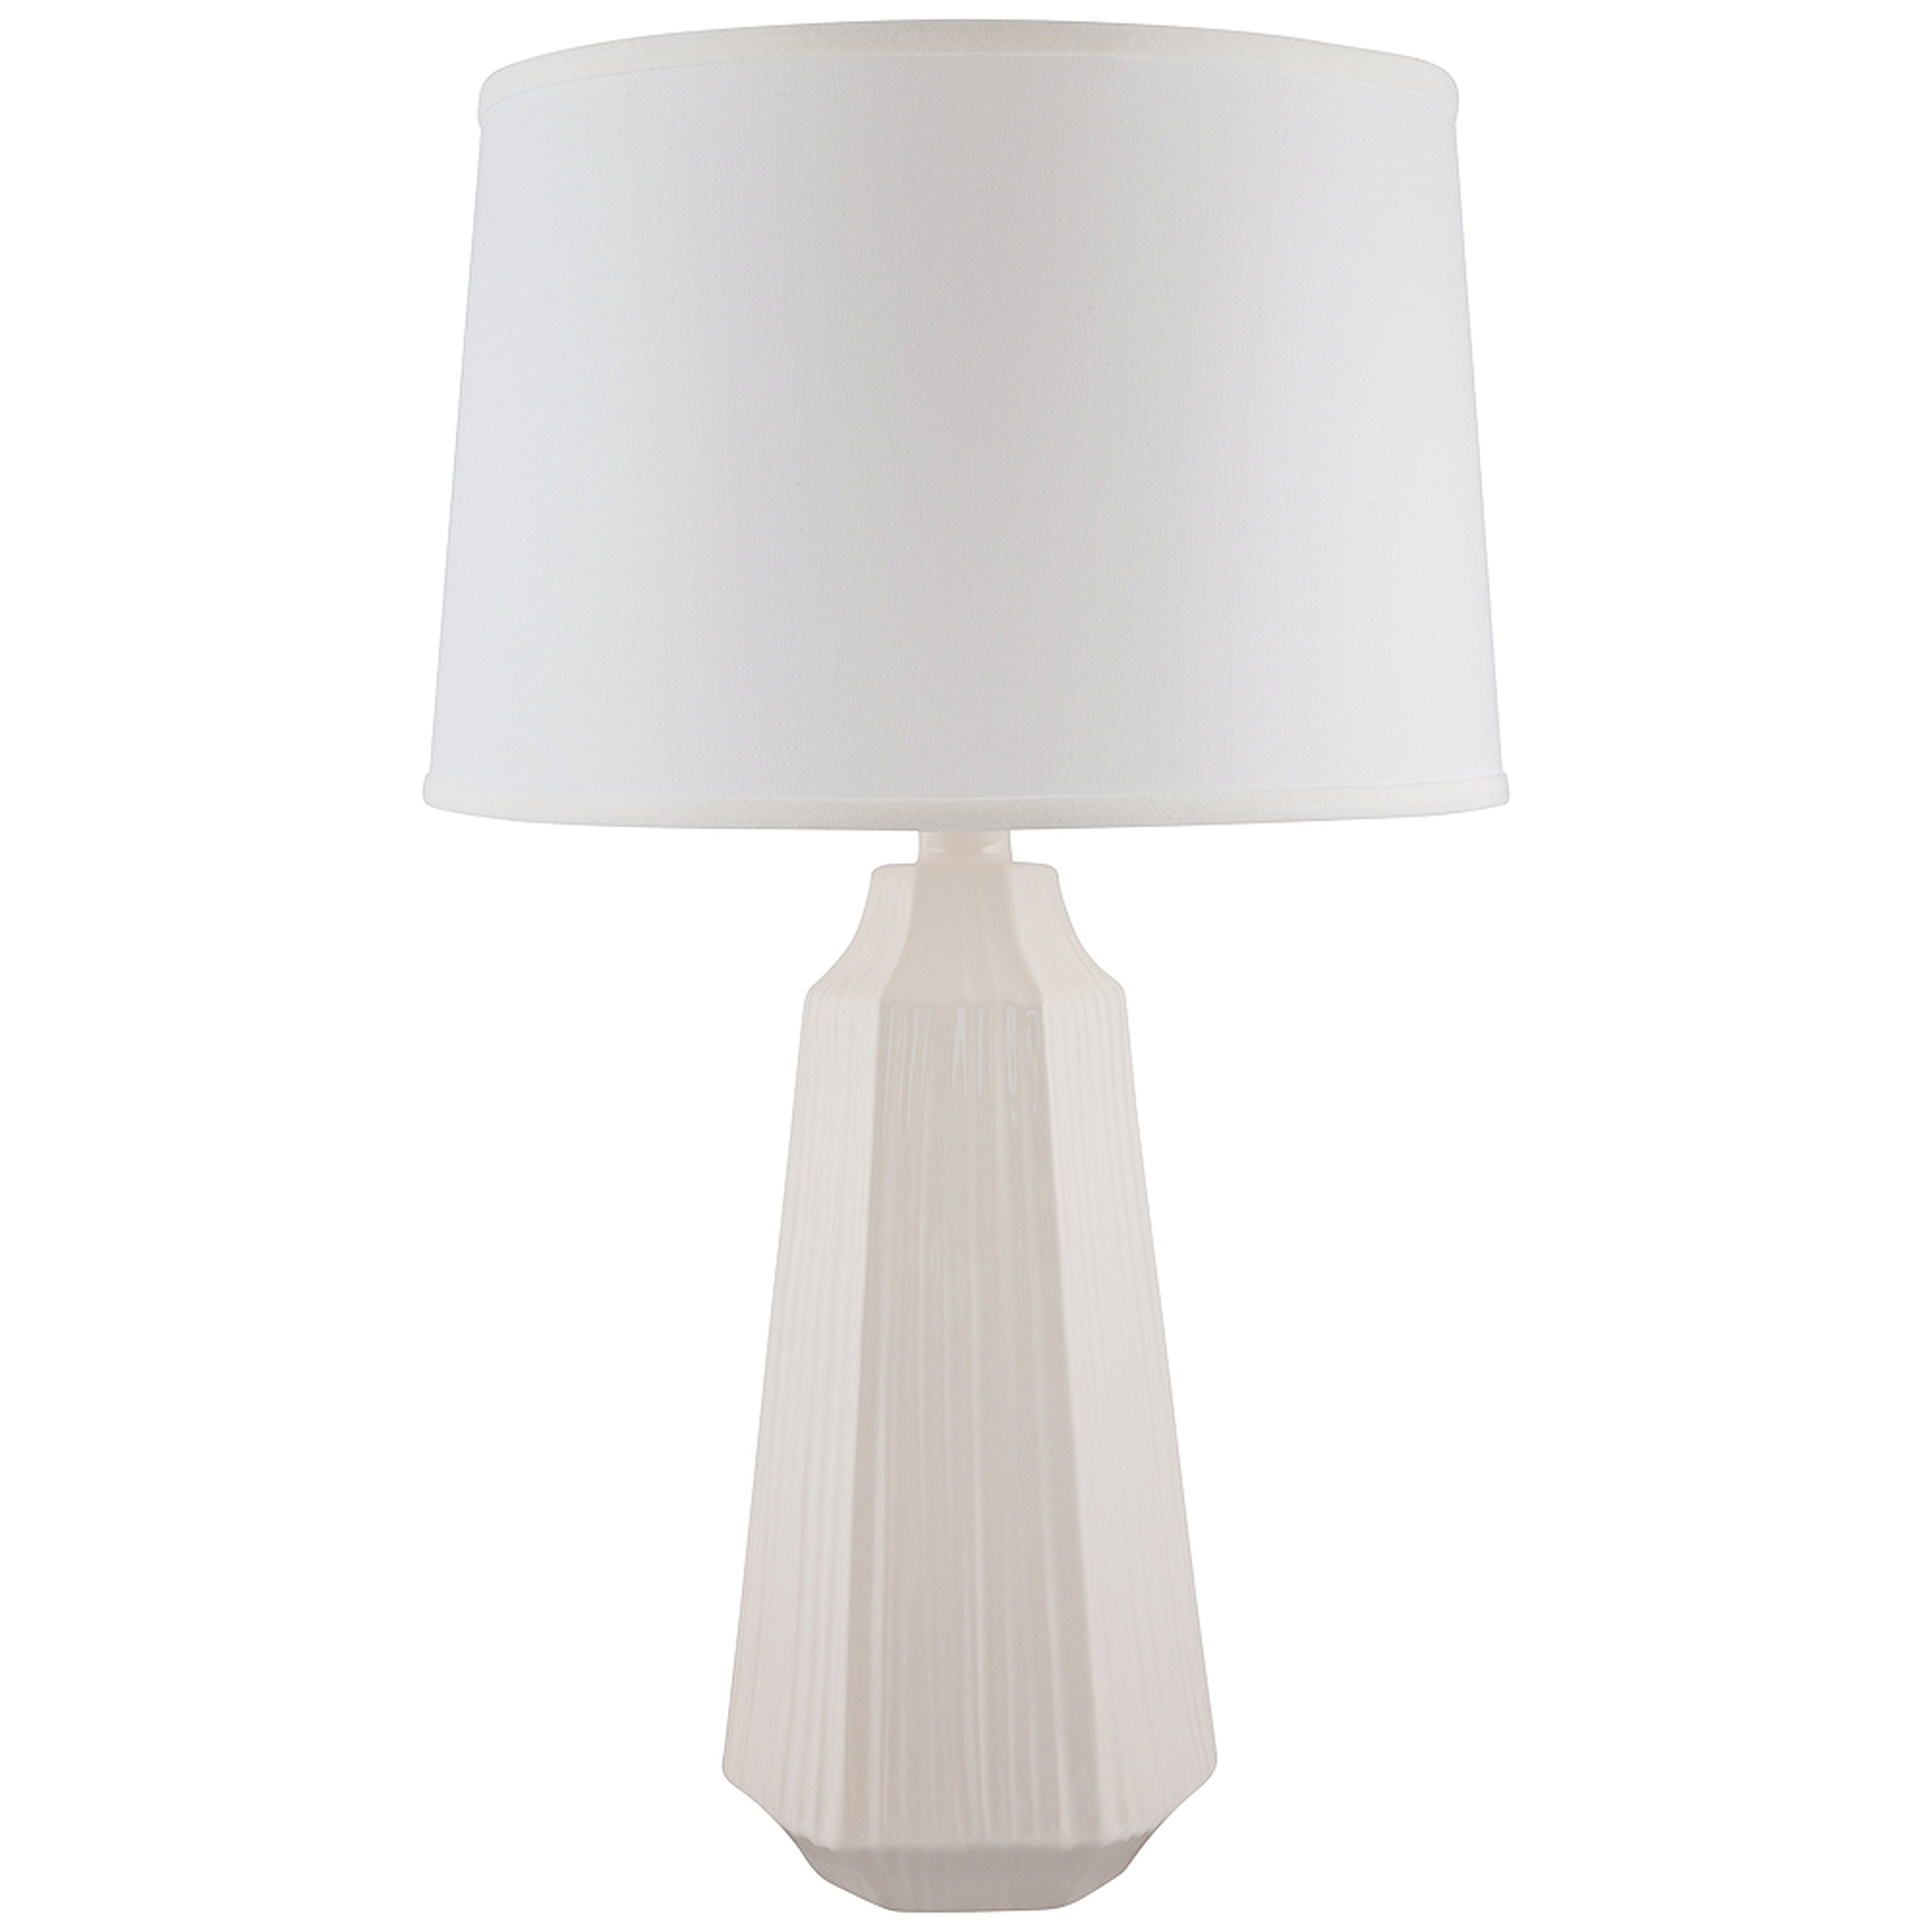 Melinda White Faceted Ceramic Table Lamp - Style # 36G99 - Lamps Plus